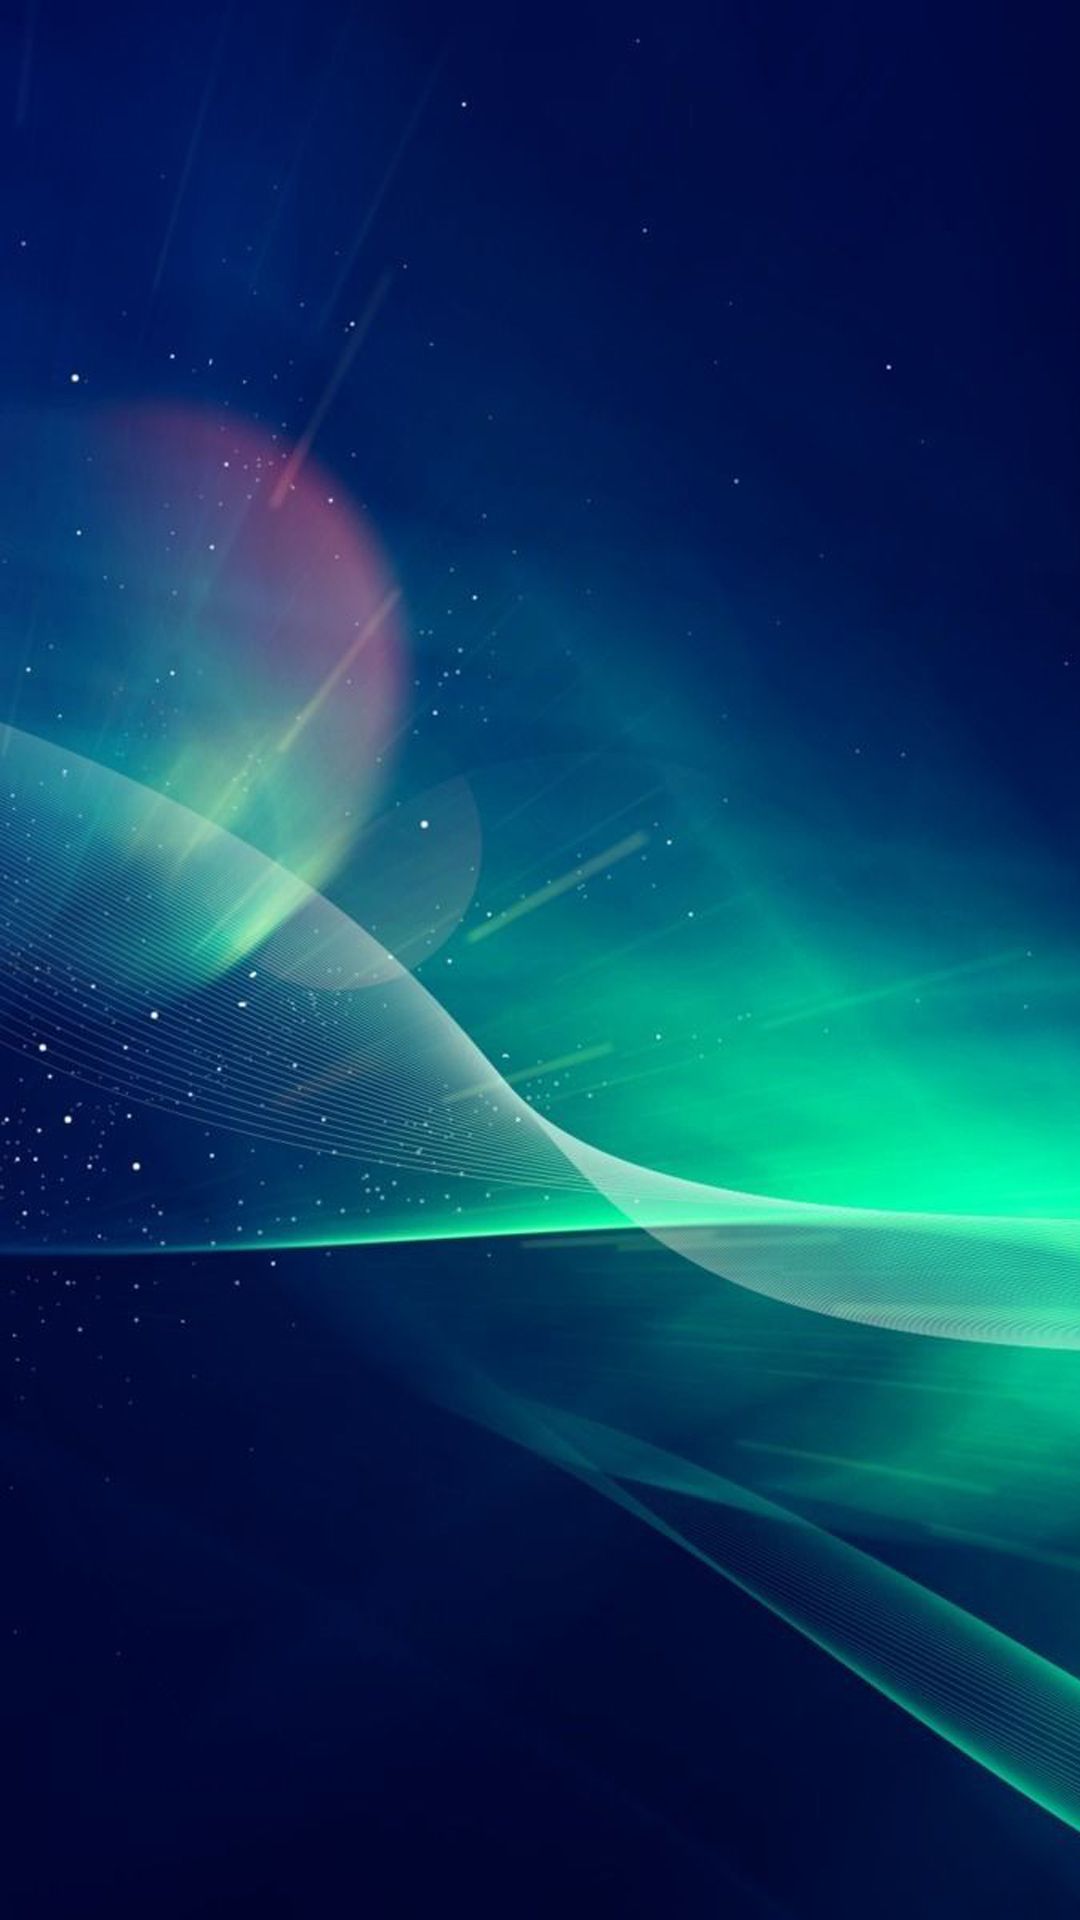 44+ Best Animated Wallpapers for iPhone on WallpaperSafari